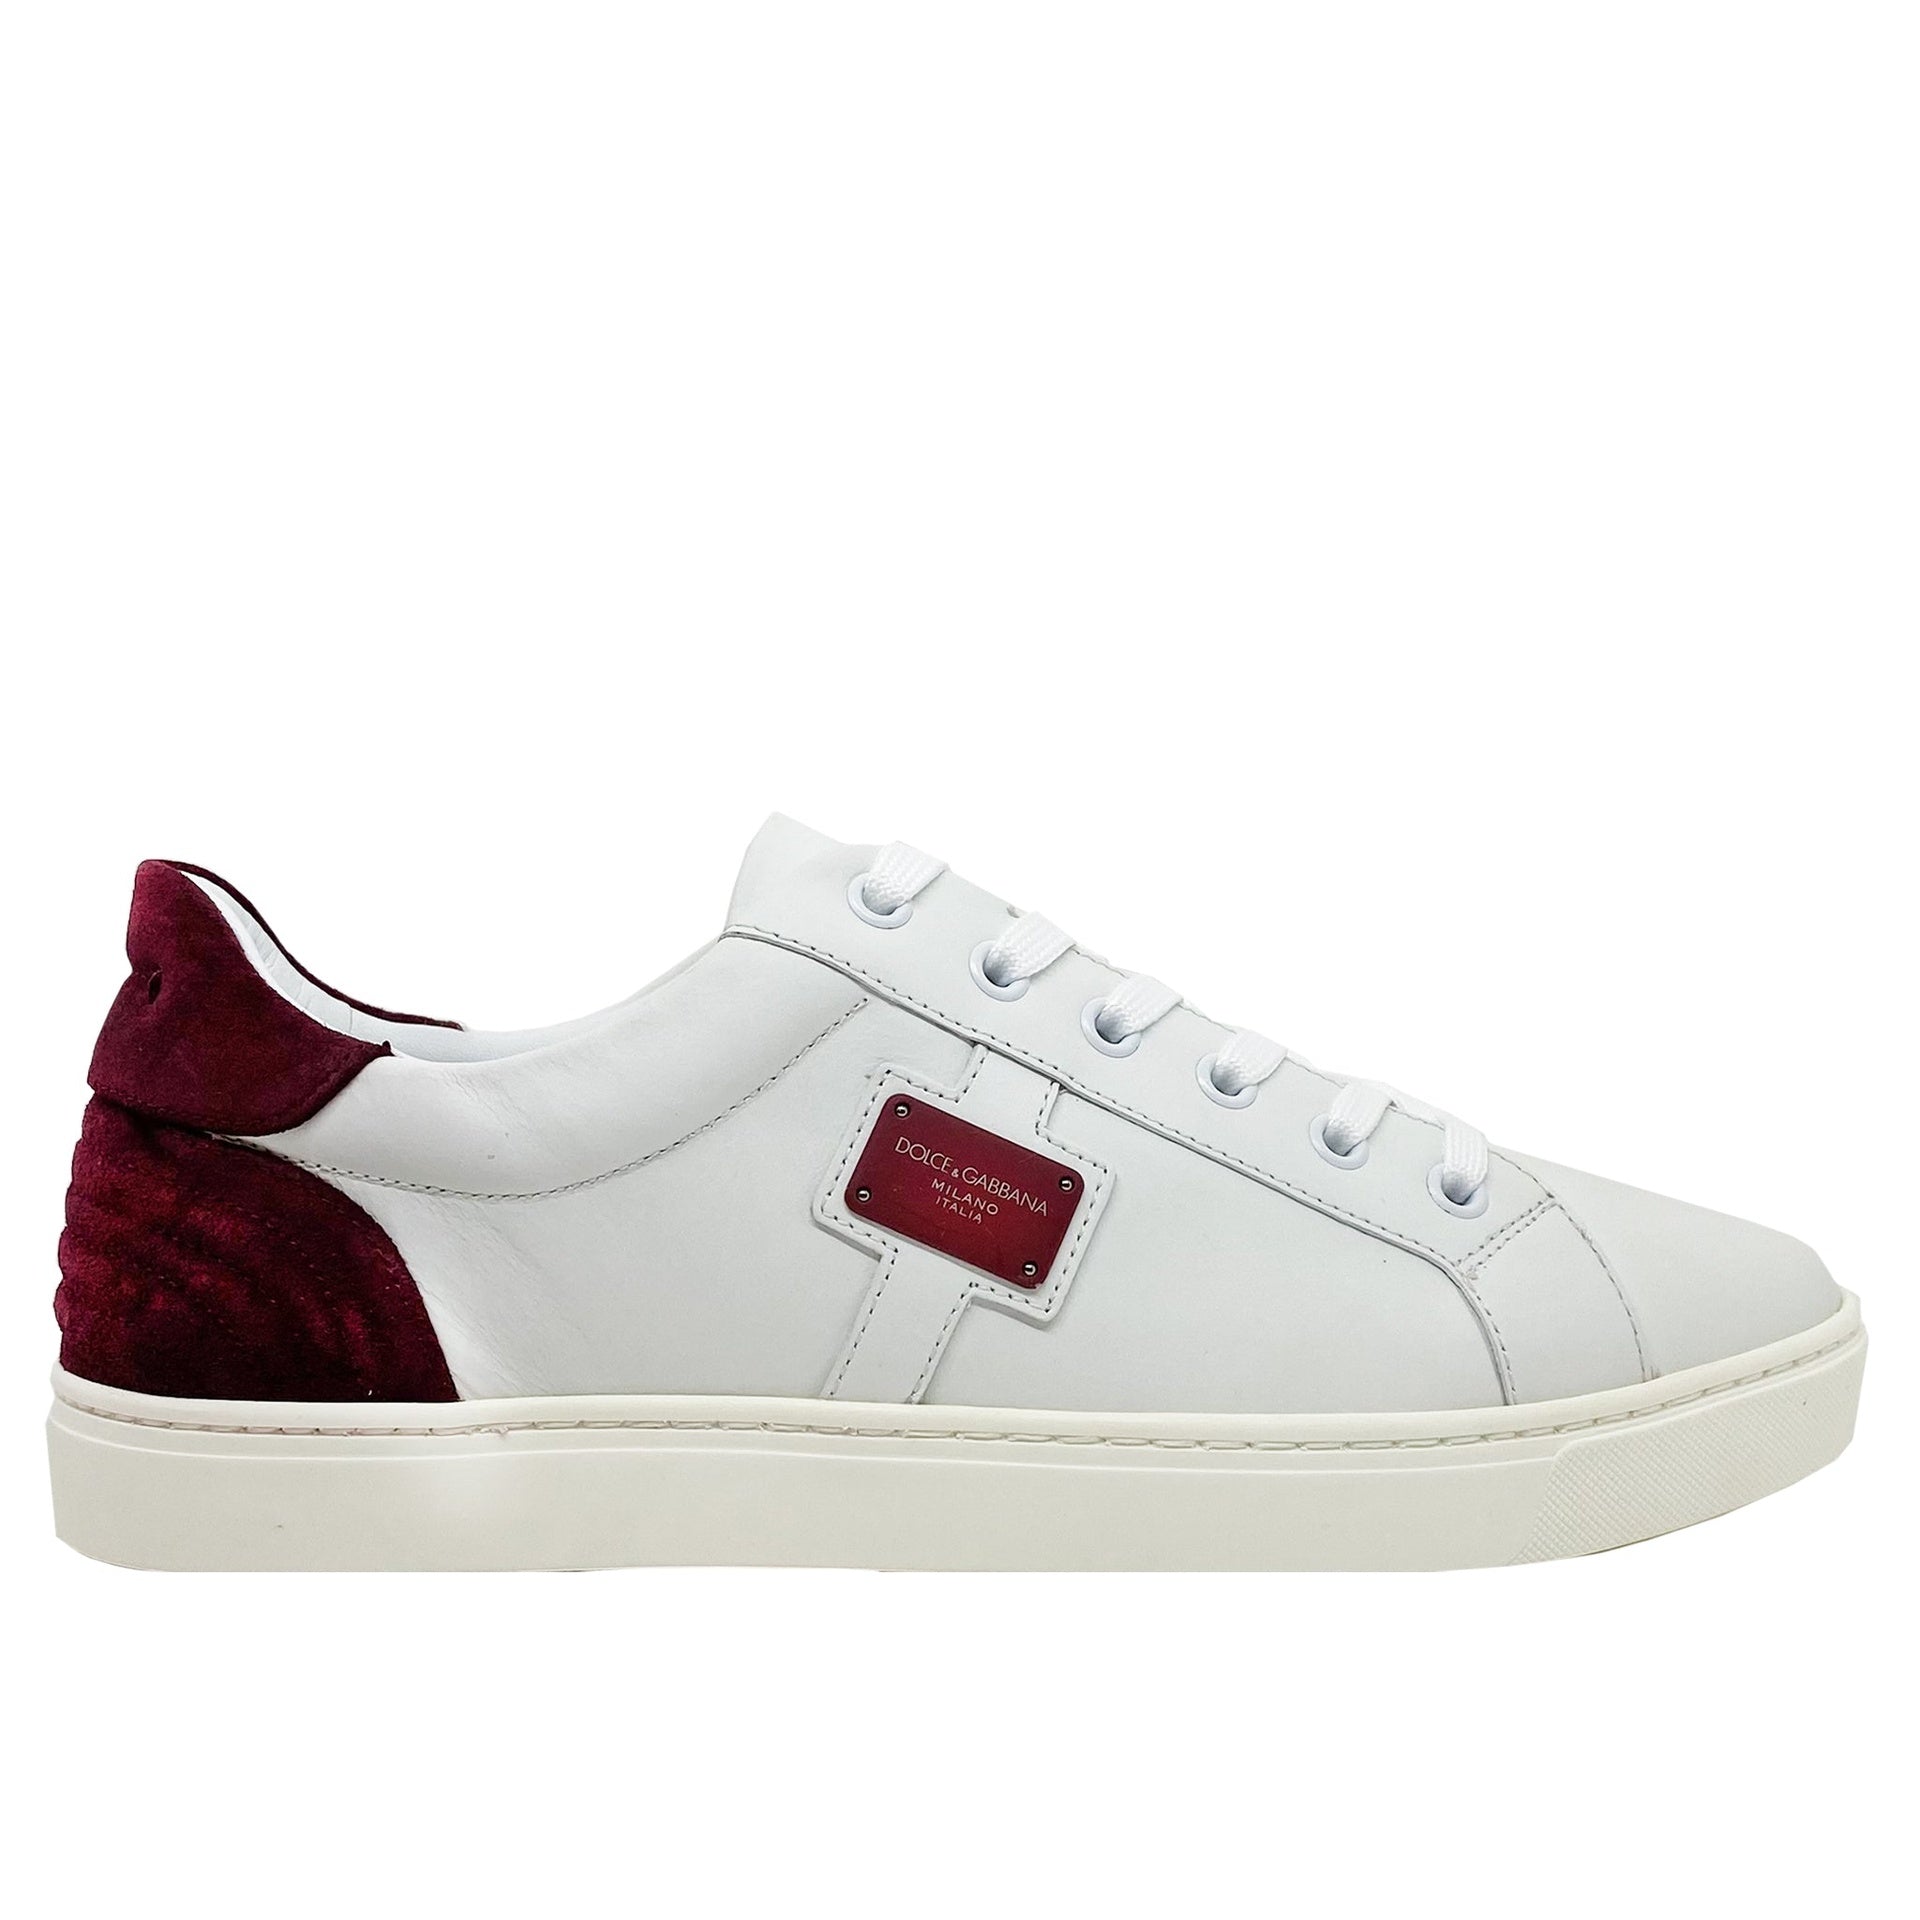 DOLCE-GABBANA-OUTLET-SALE-Dolce-Gabbana-Logo-Leather-Sneakers-Sneakers-WHITE-44-ARCHIVE-COLLECTION.jpg